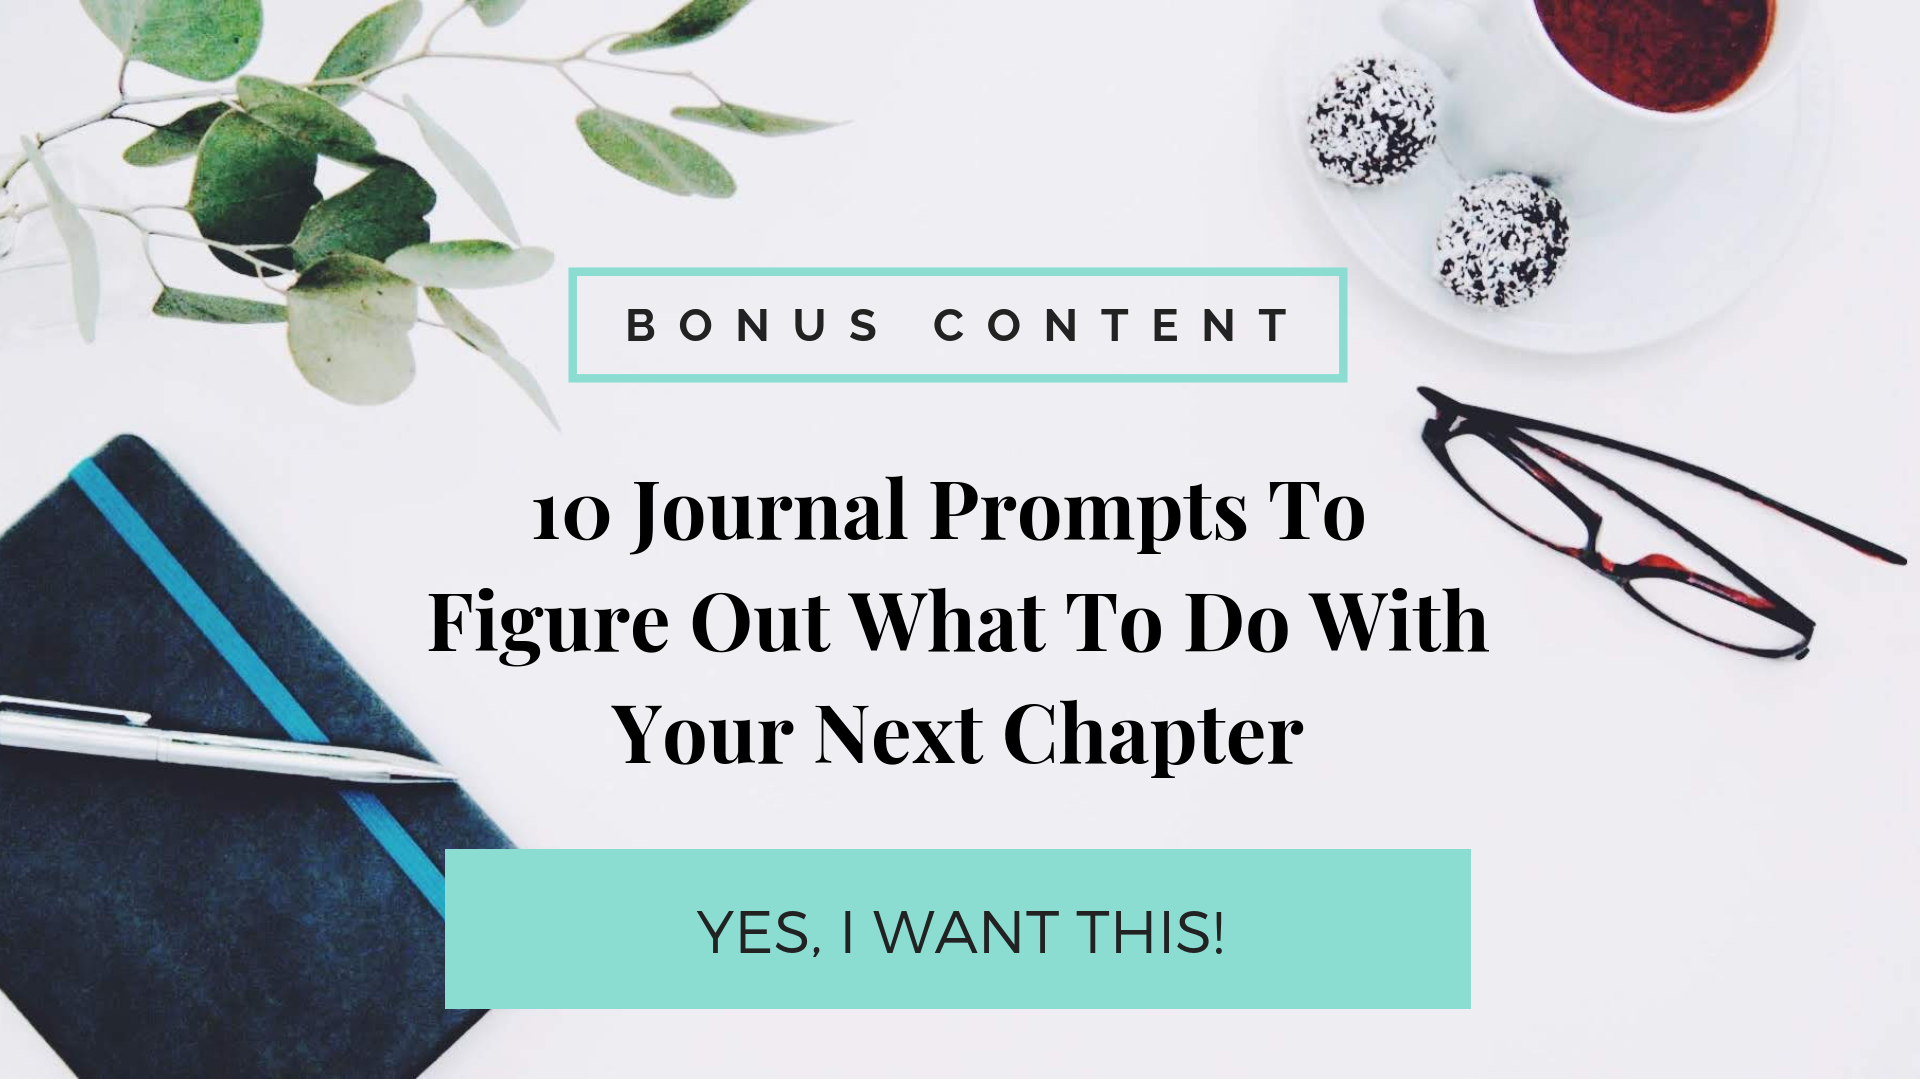 Journal Prompts To Figure Out What To Do With Your Next Chapter